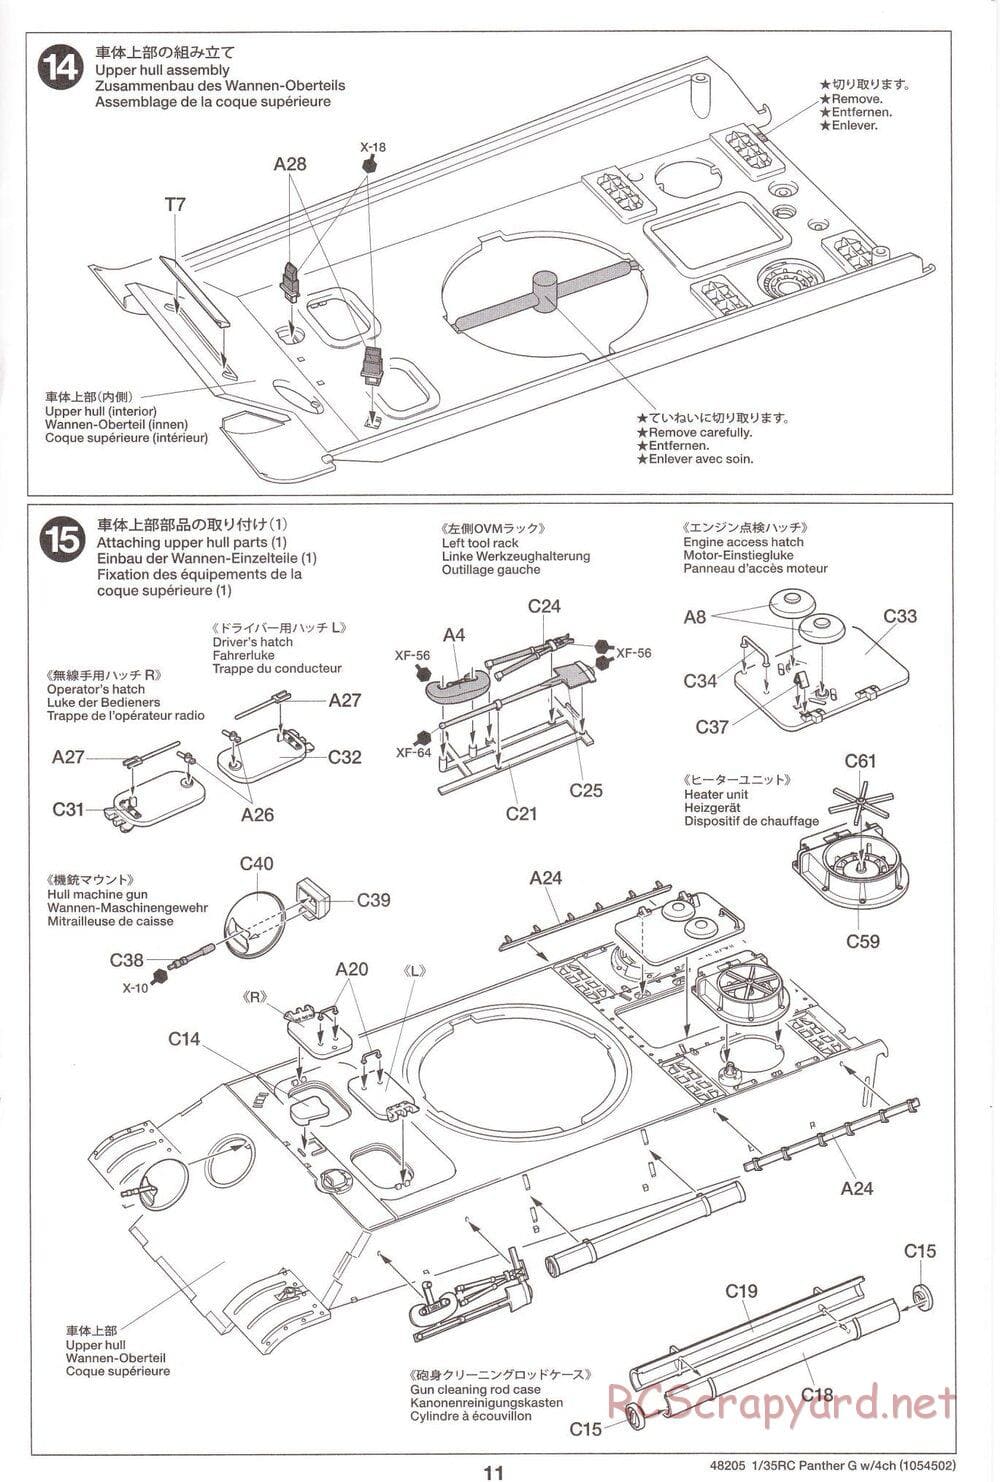 Tamiya - German Panther Type G - 1/35 Scale Chassis - Manual - Page 11